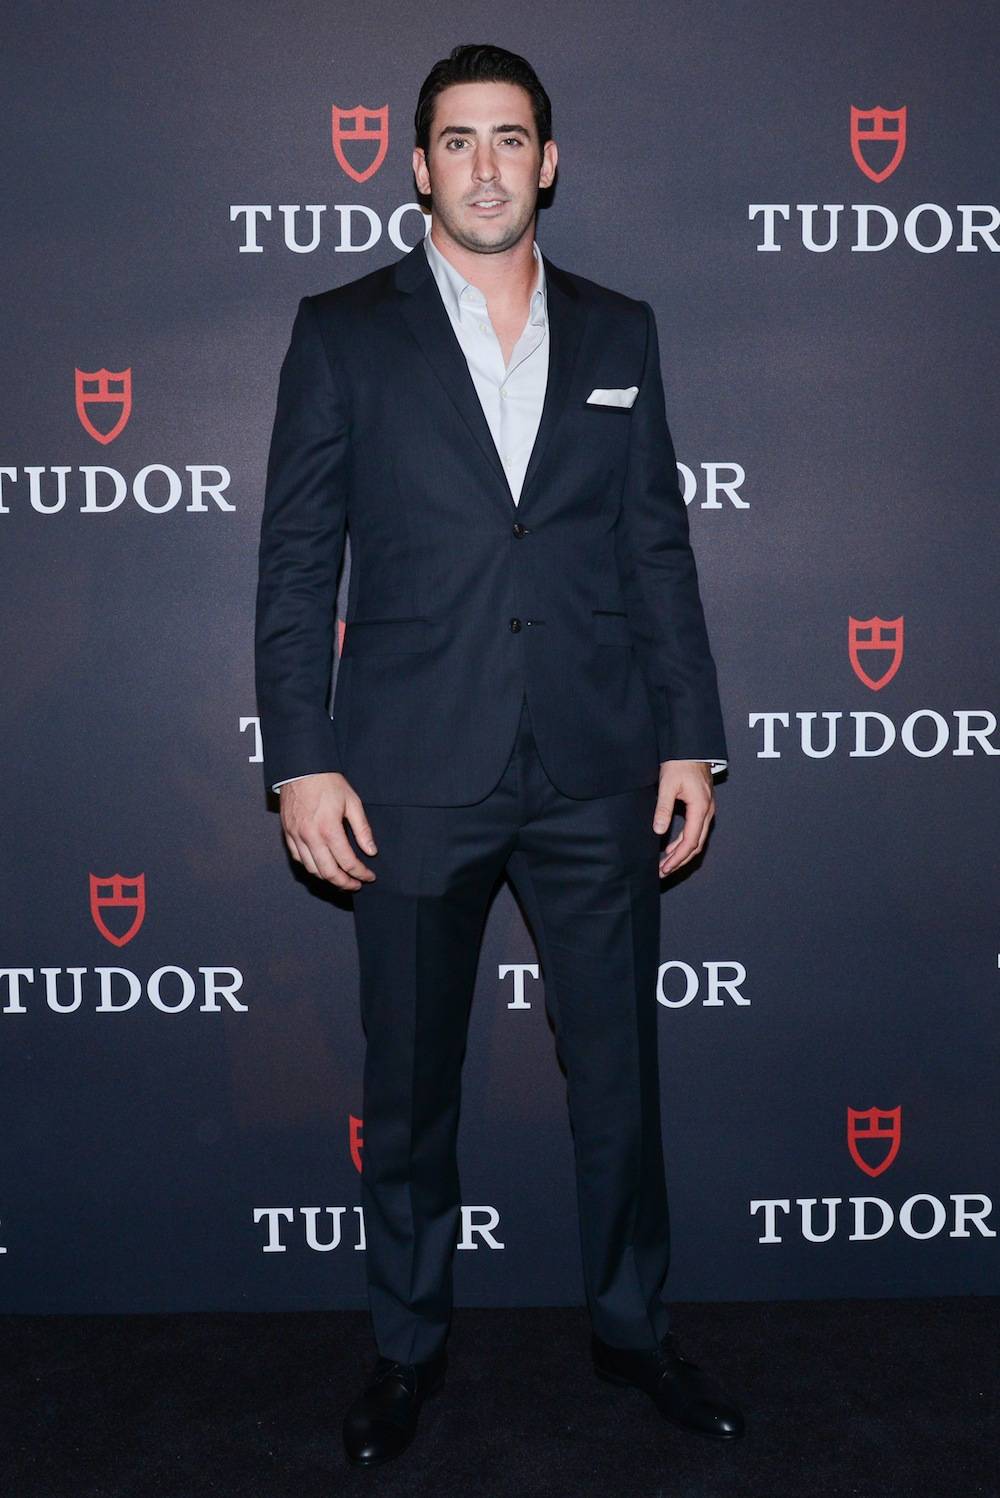 TUDOR WATCHES US Launch Event